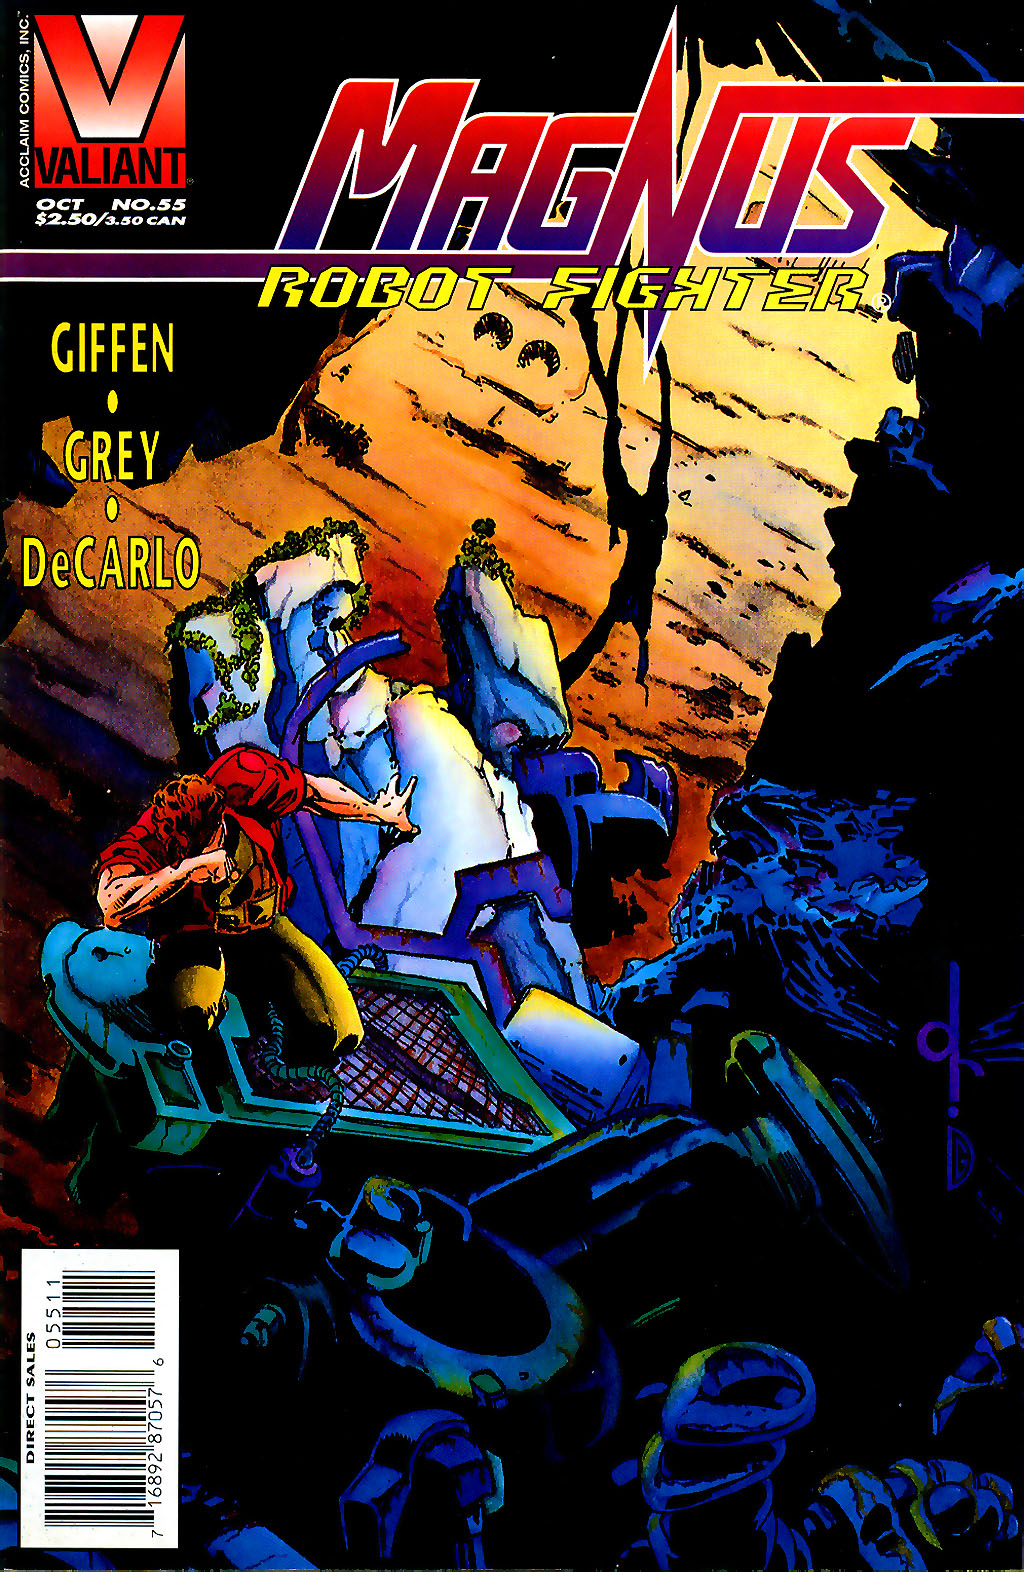 Magnus Robot Fighter (1991) issue 55 - Page 1